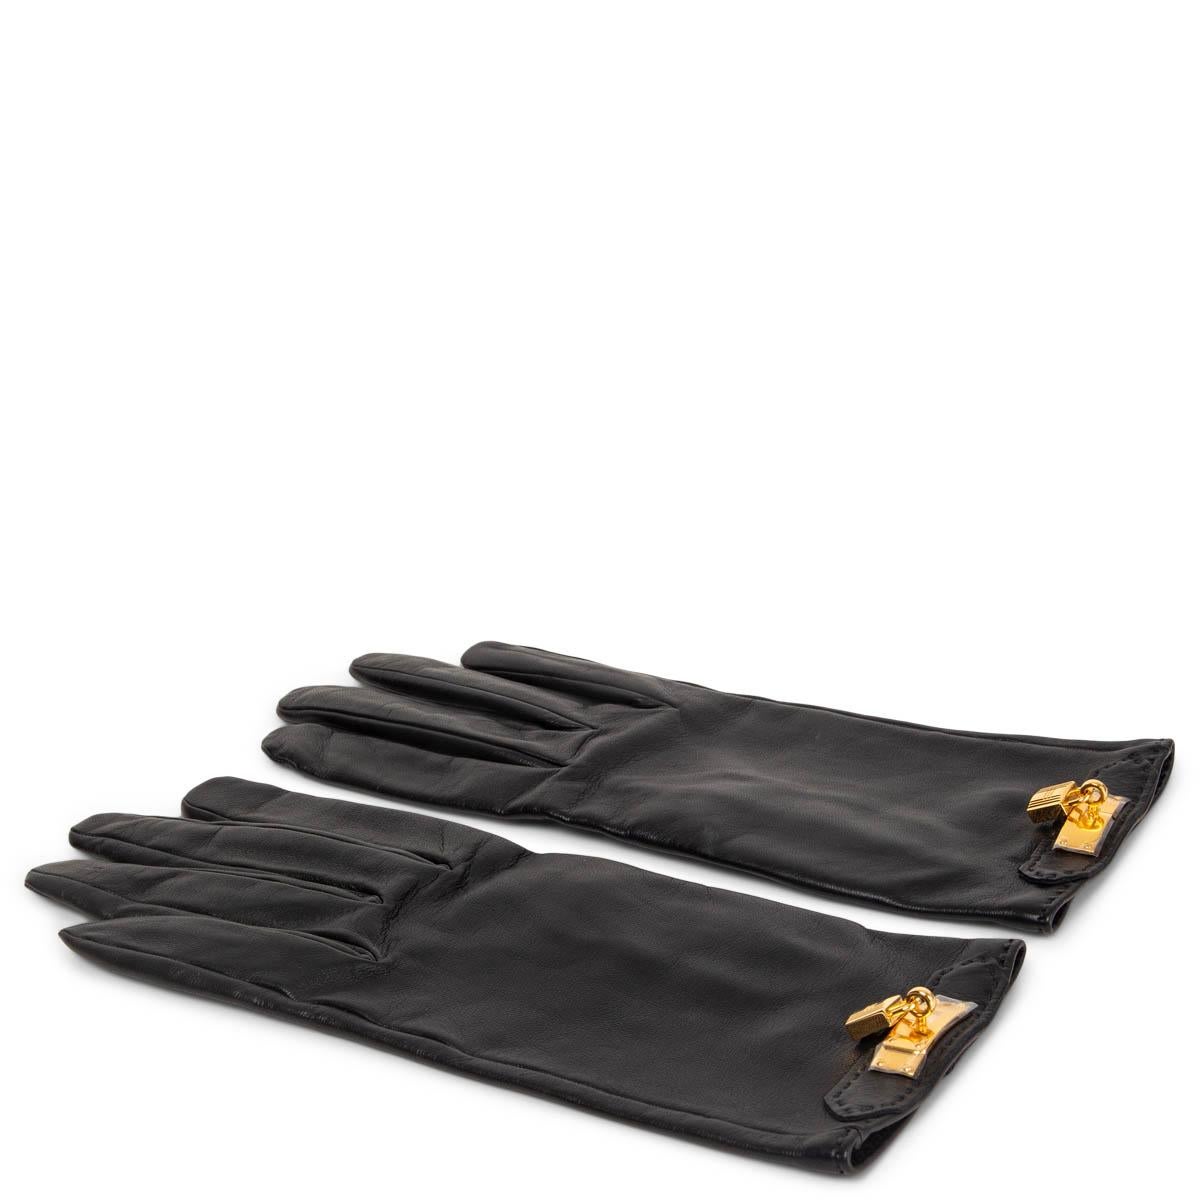 100% authentic Hermès Soya Lock gloves in black smooth lambskin featuring gold-tone metal lock. Silk-lined. Brand new. 

Measurements
Size	8.5
Tag Size	8.5
Middle Finger to Wrist	25cm (9.8in)
Middle Finger	10cm (3.9in)
Width	10cm